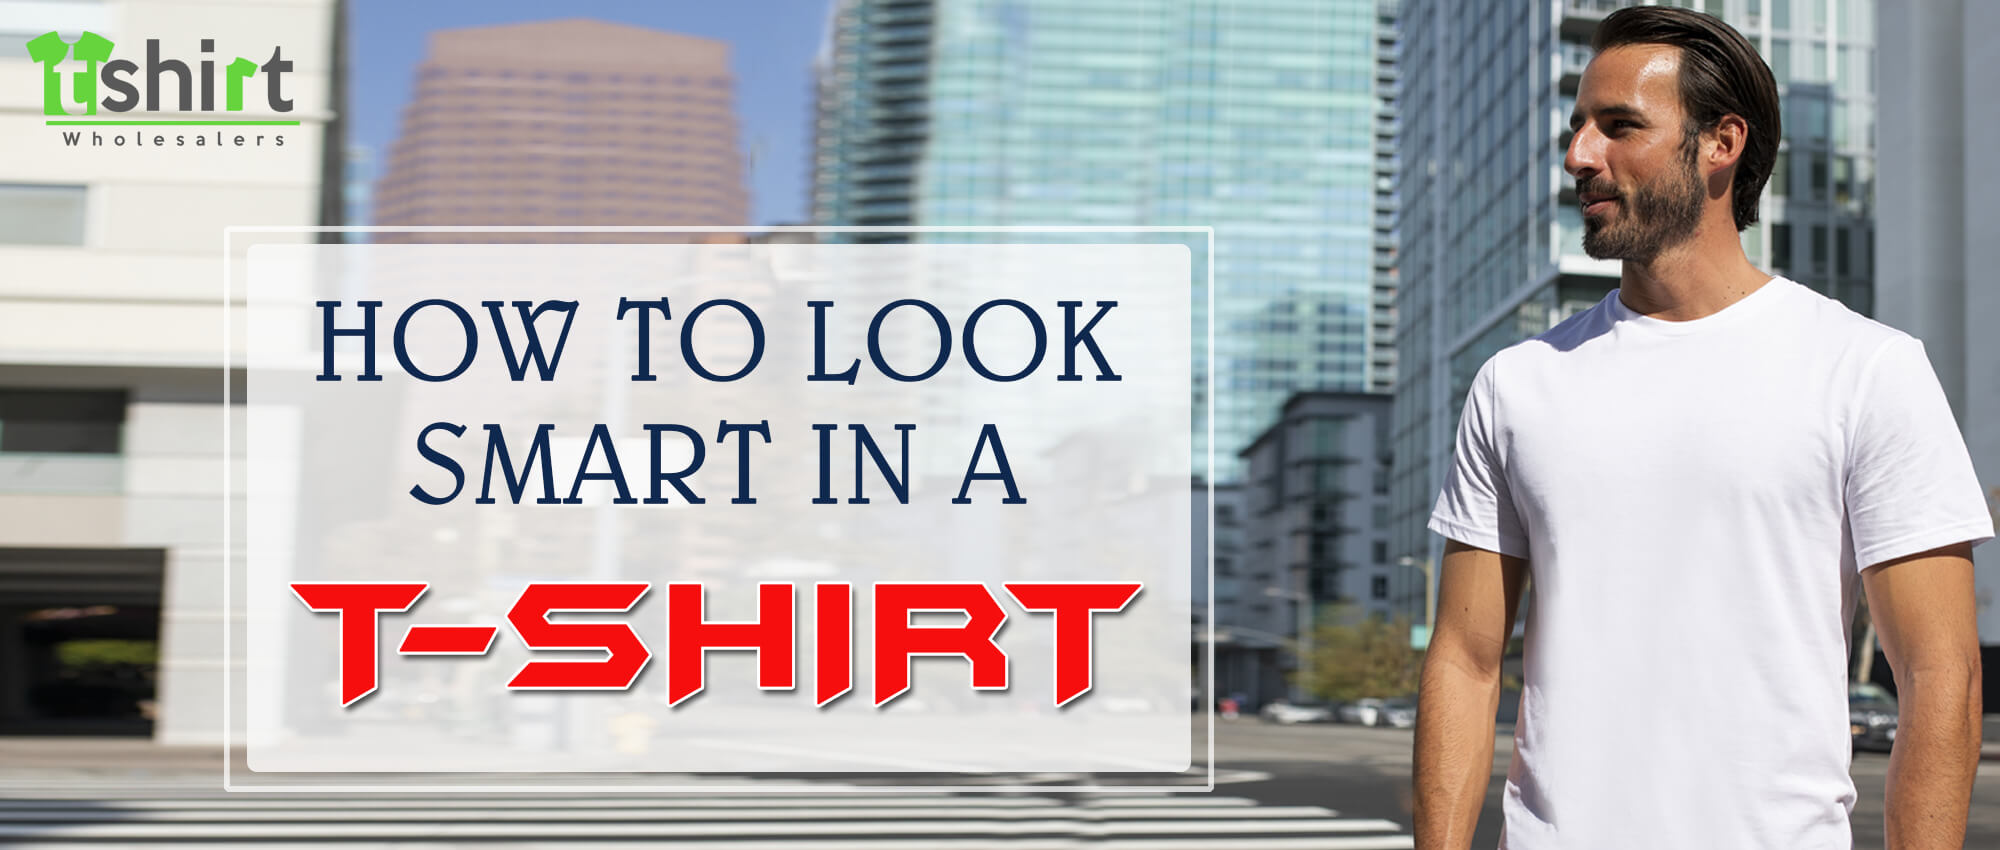 HOW TO LOOK SMART IN A T-SHIRT